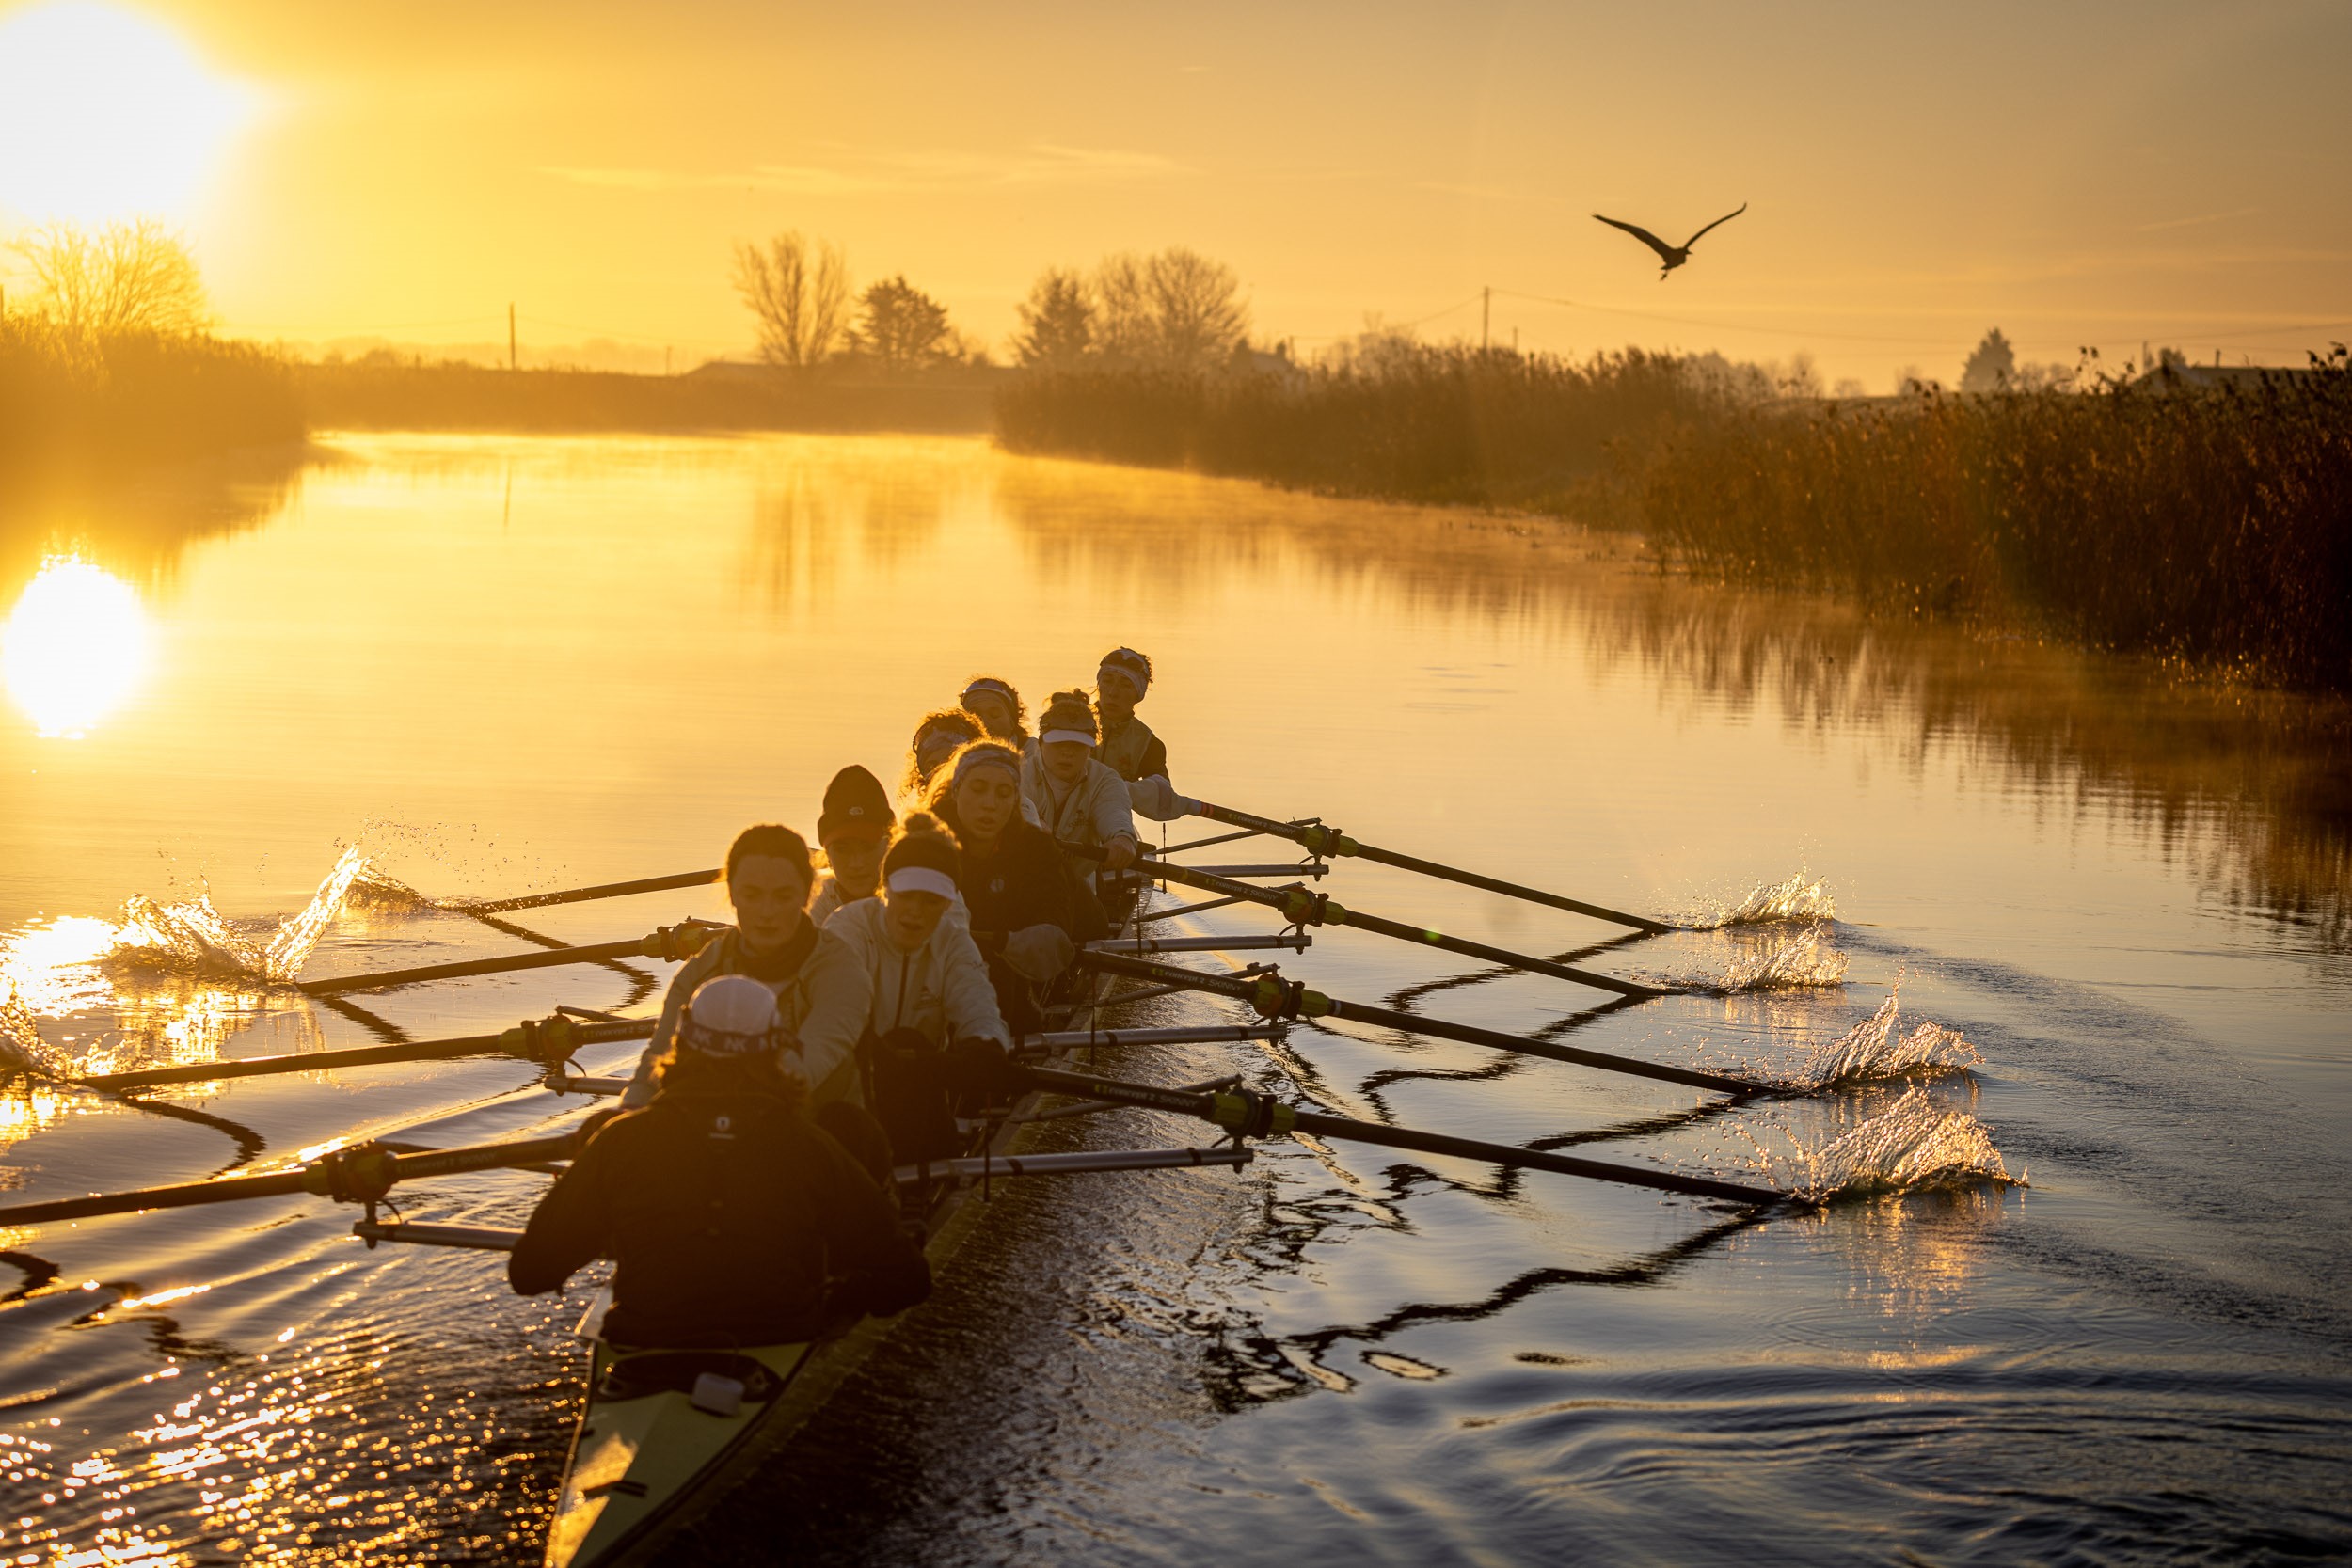 An eight-crew rowing boat with cox rowing on a still river into a low sunshine